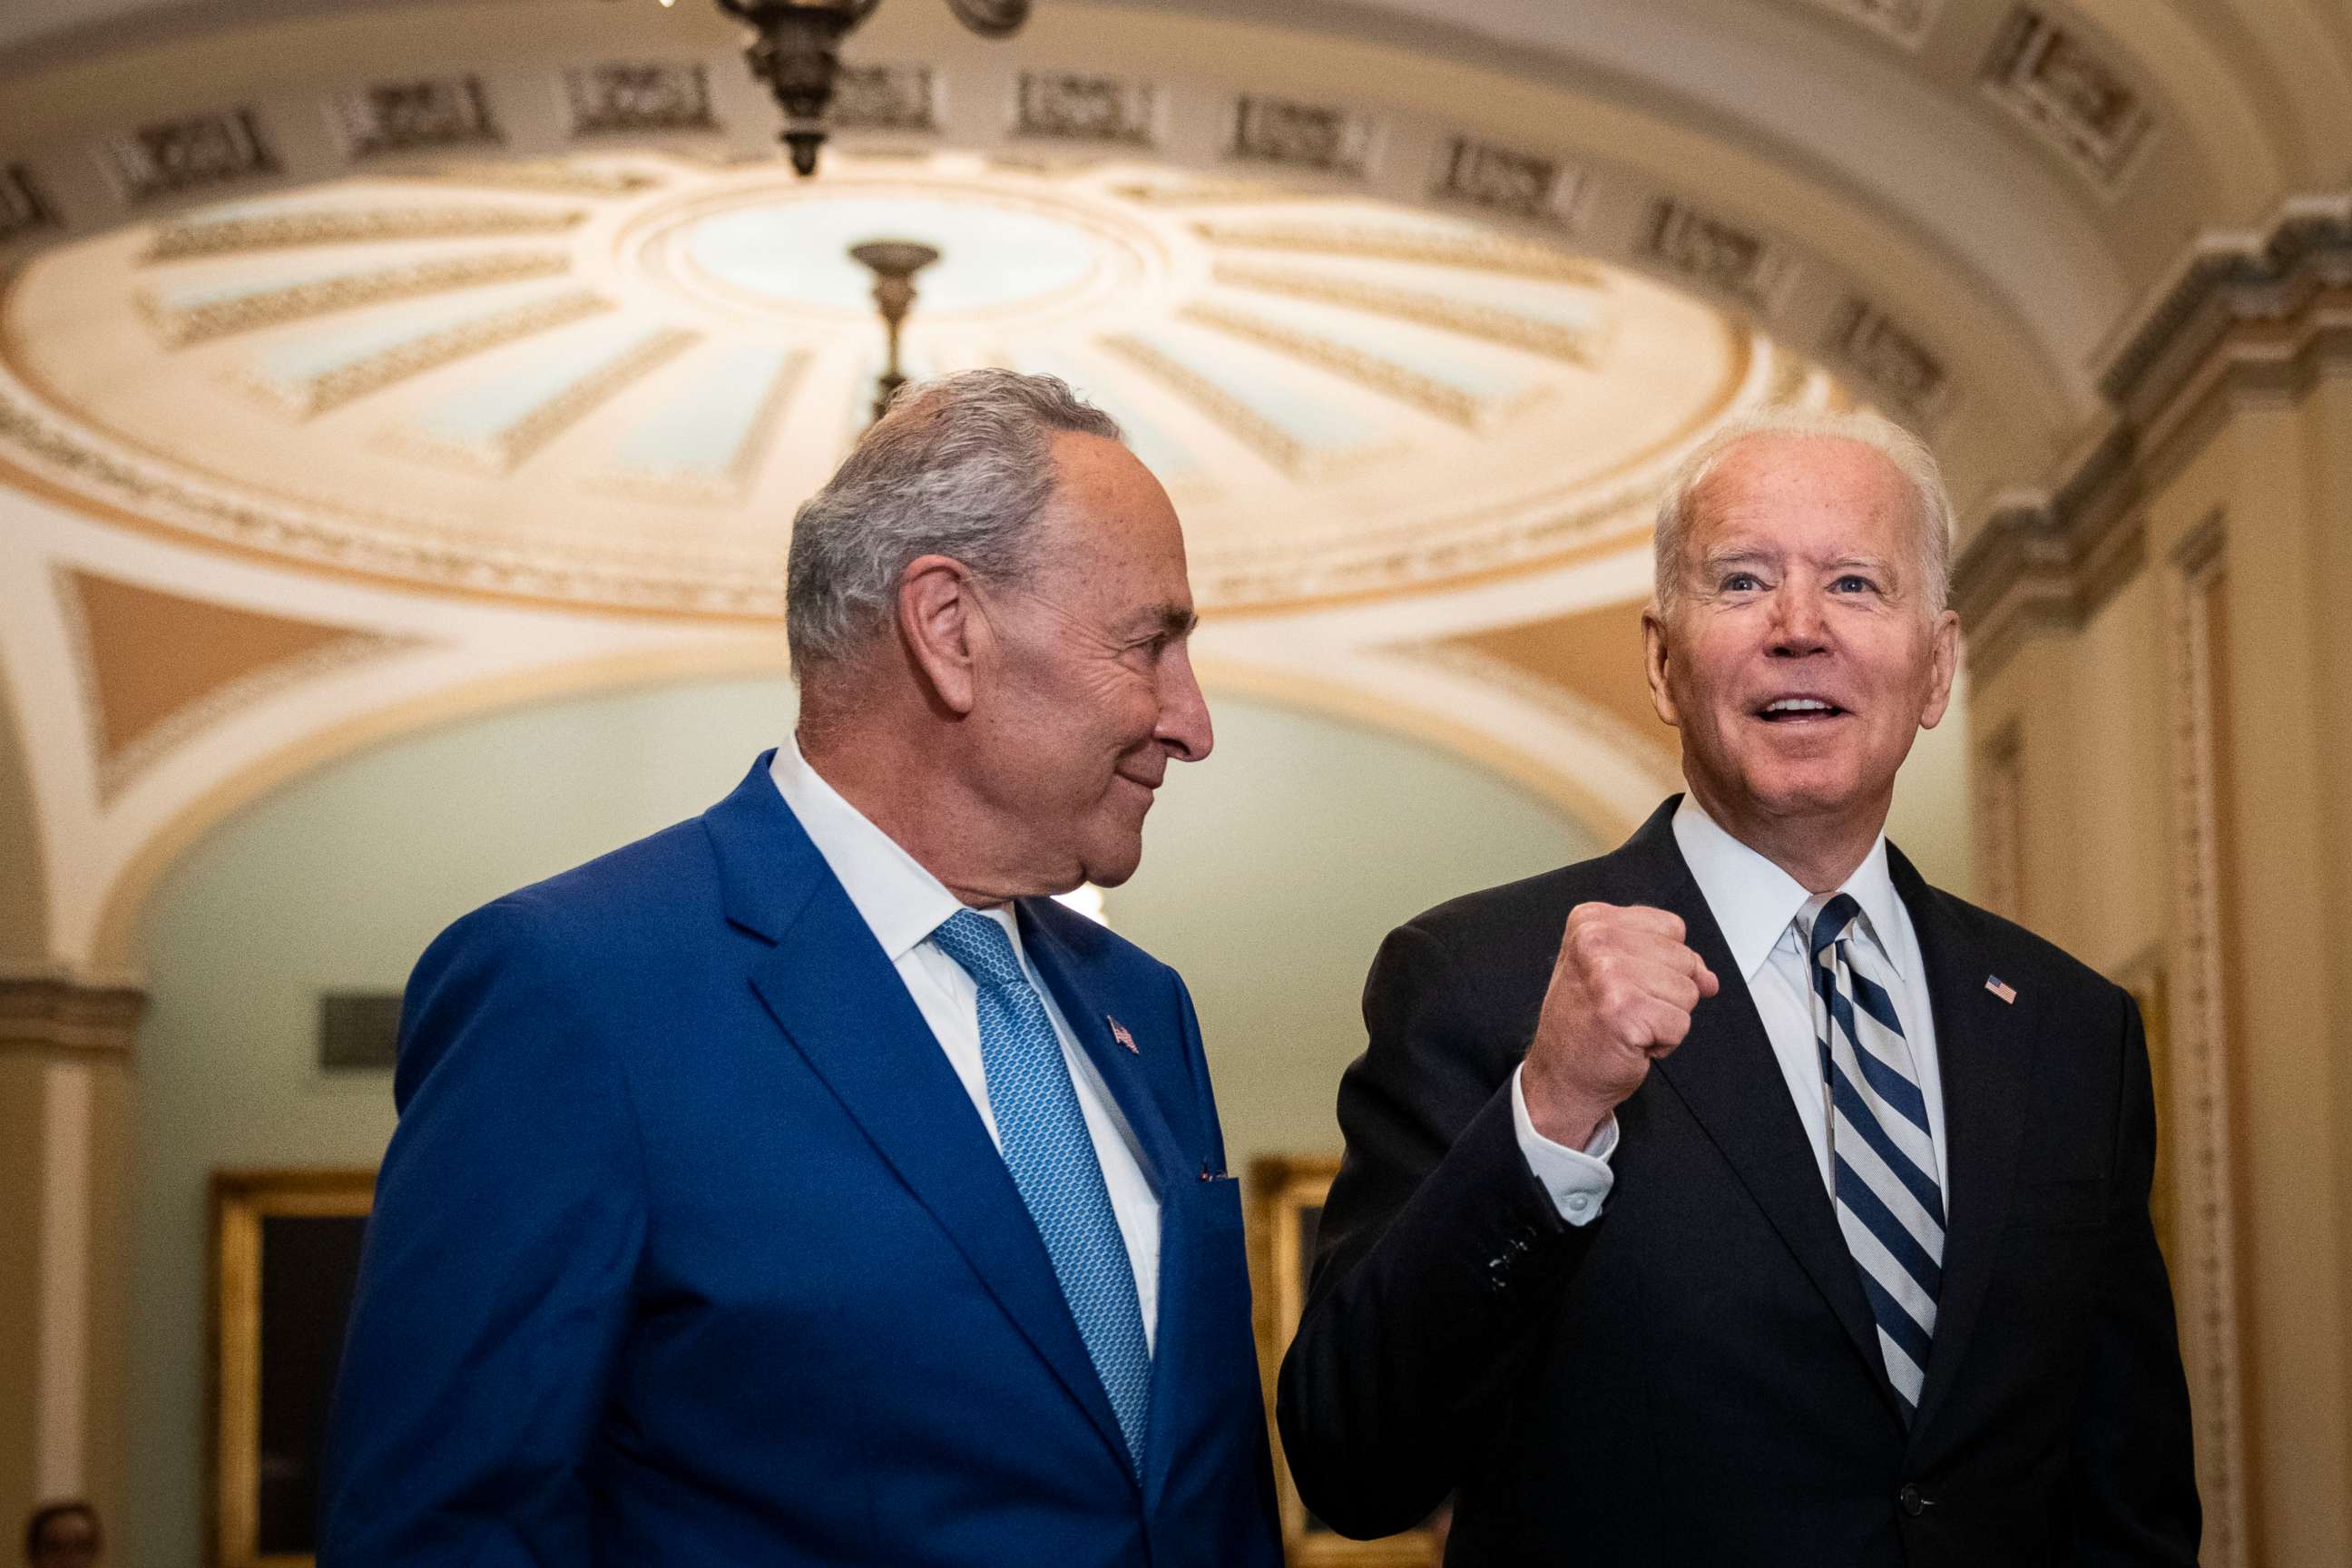 PHOTO: Senate Majority Leader Chuck Schumer and President Joe Biden speak briefly to reporters as they arrive at the U.S. Capitol for a Senate Democratic luncheon July 14, 2021 in Washington.